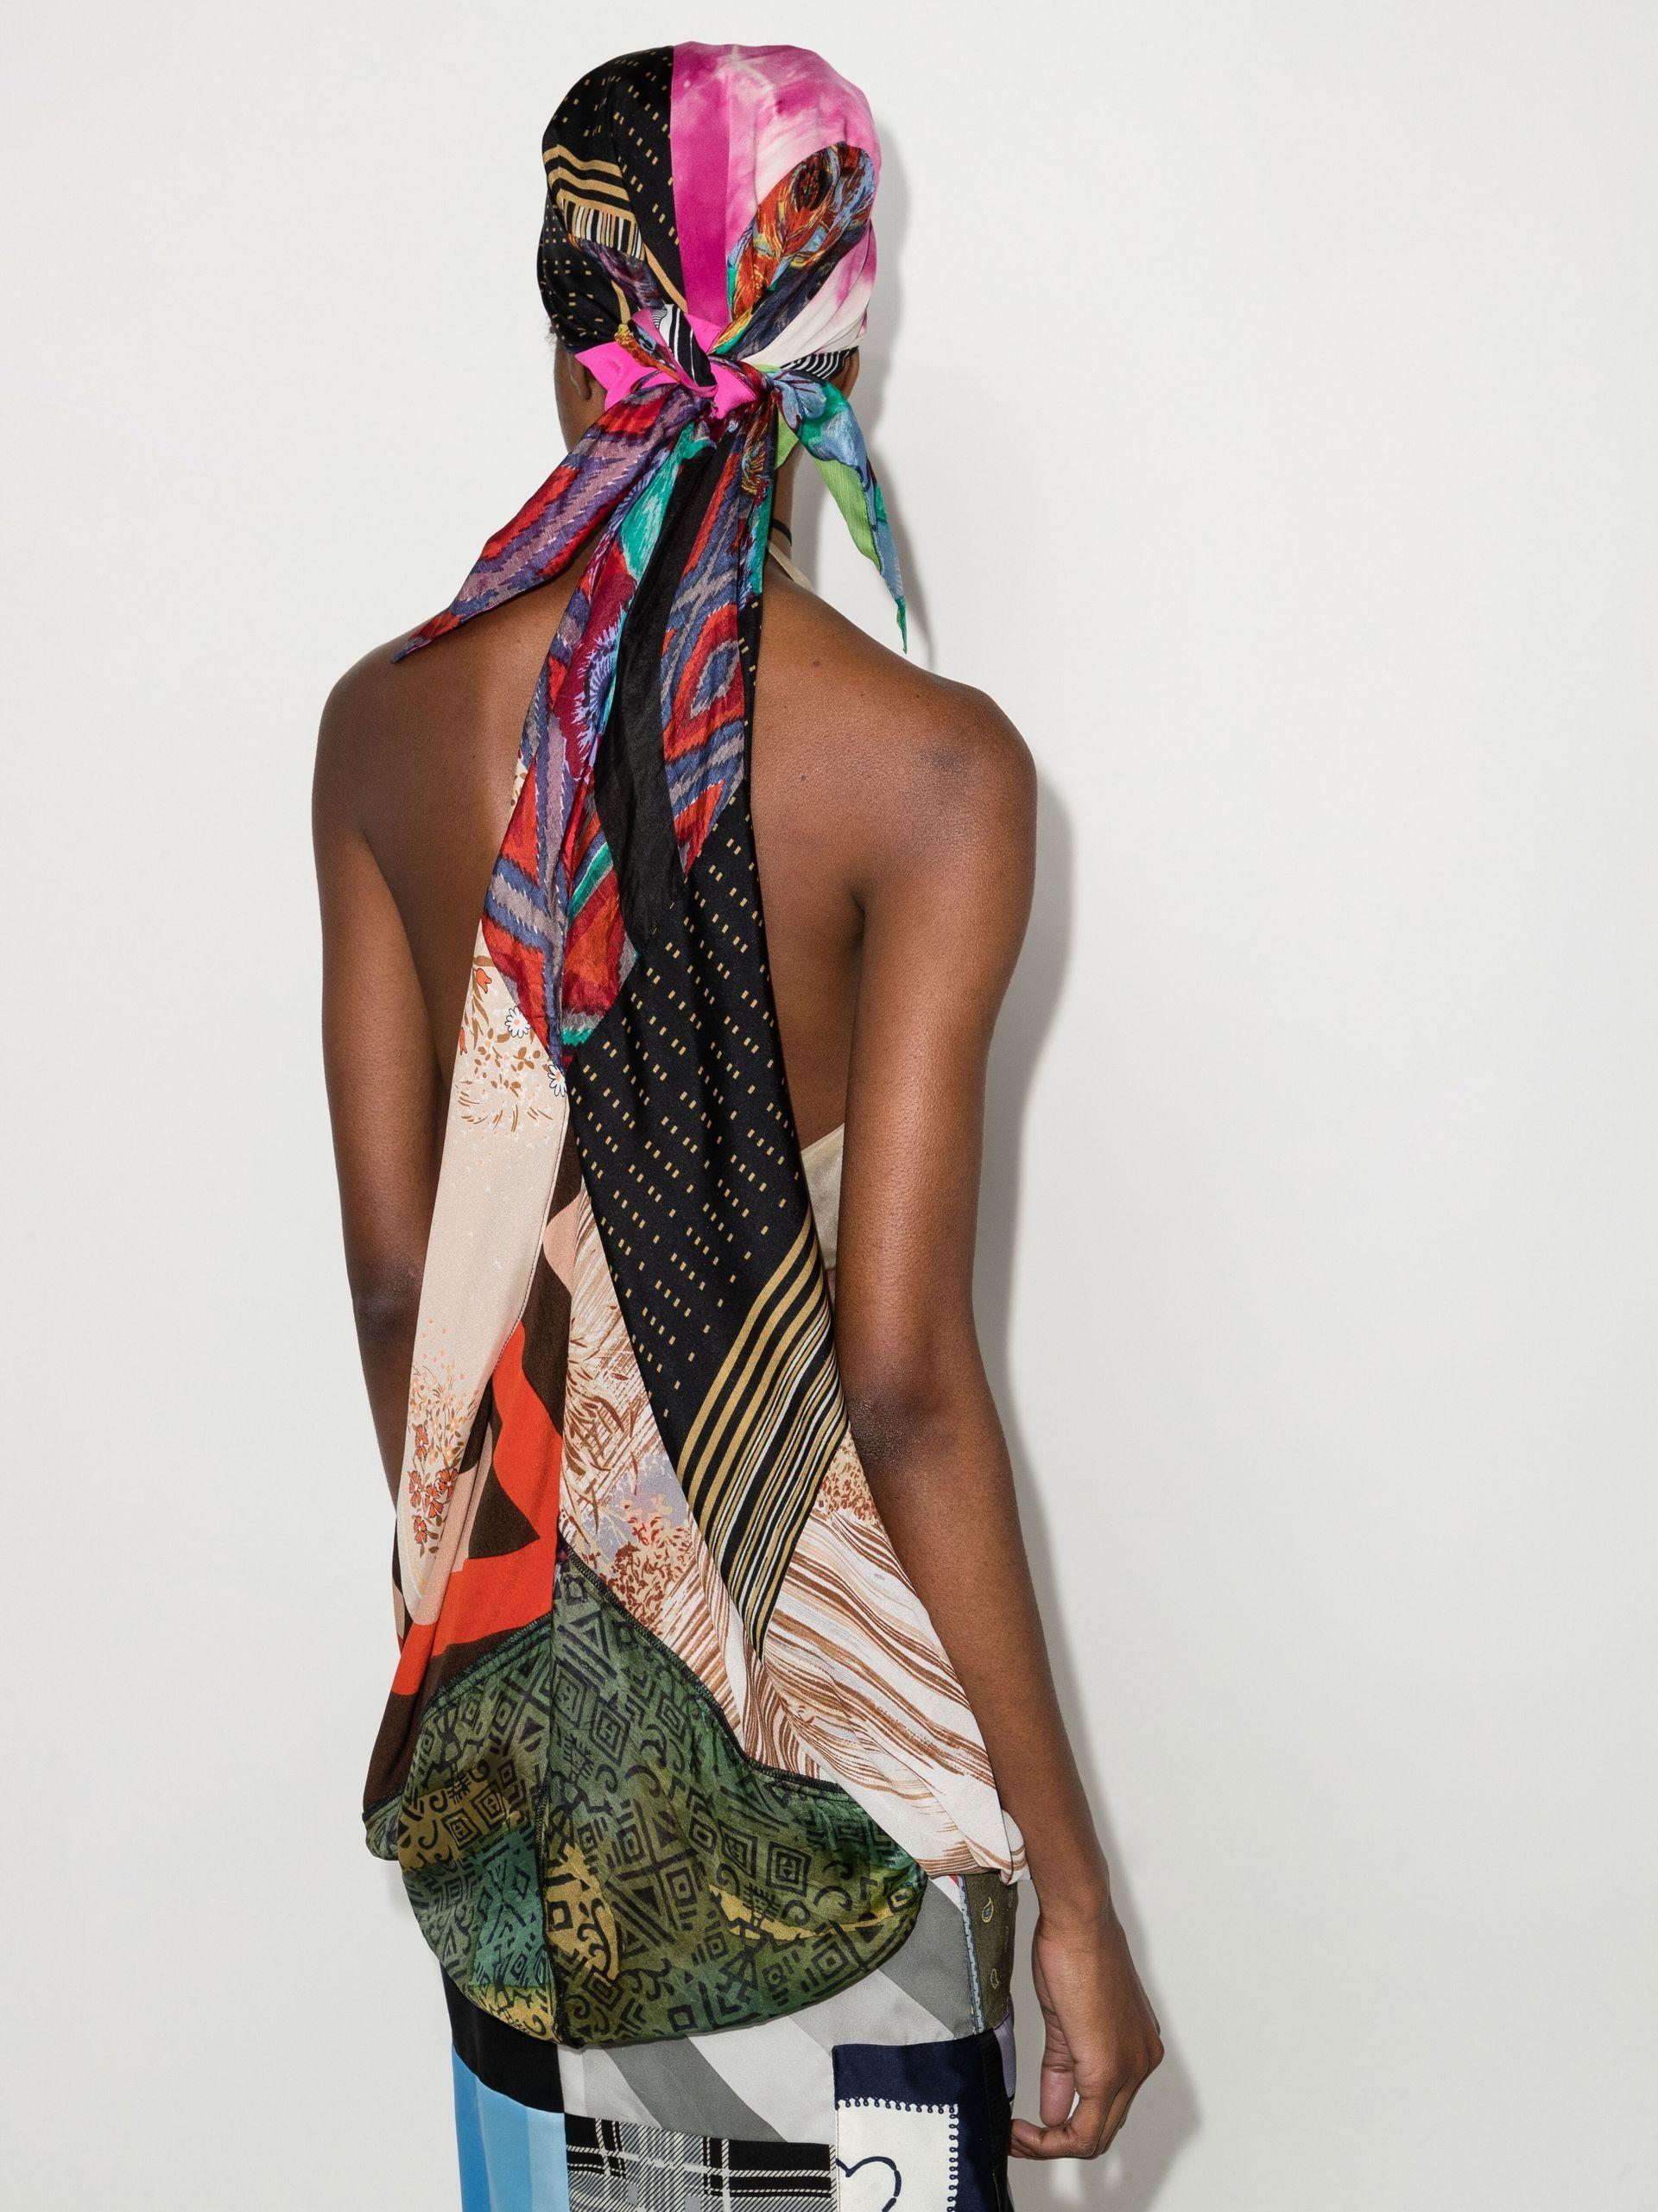 Scarf styled as a halter, using both a Mors and Chaîne d'ancre